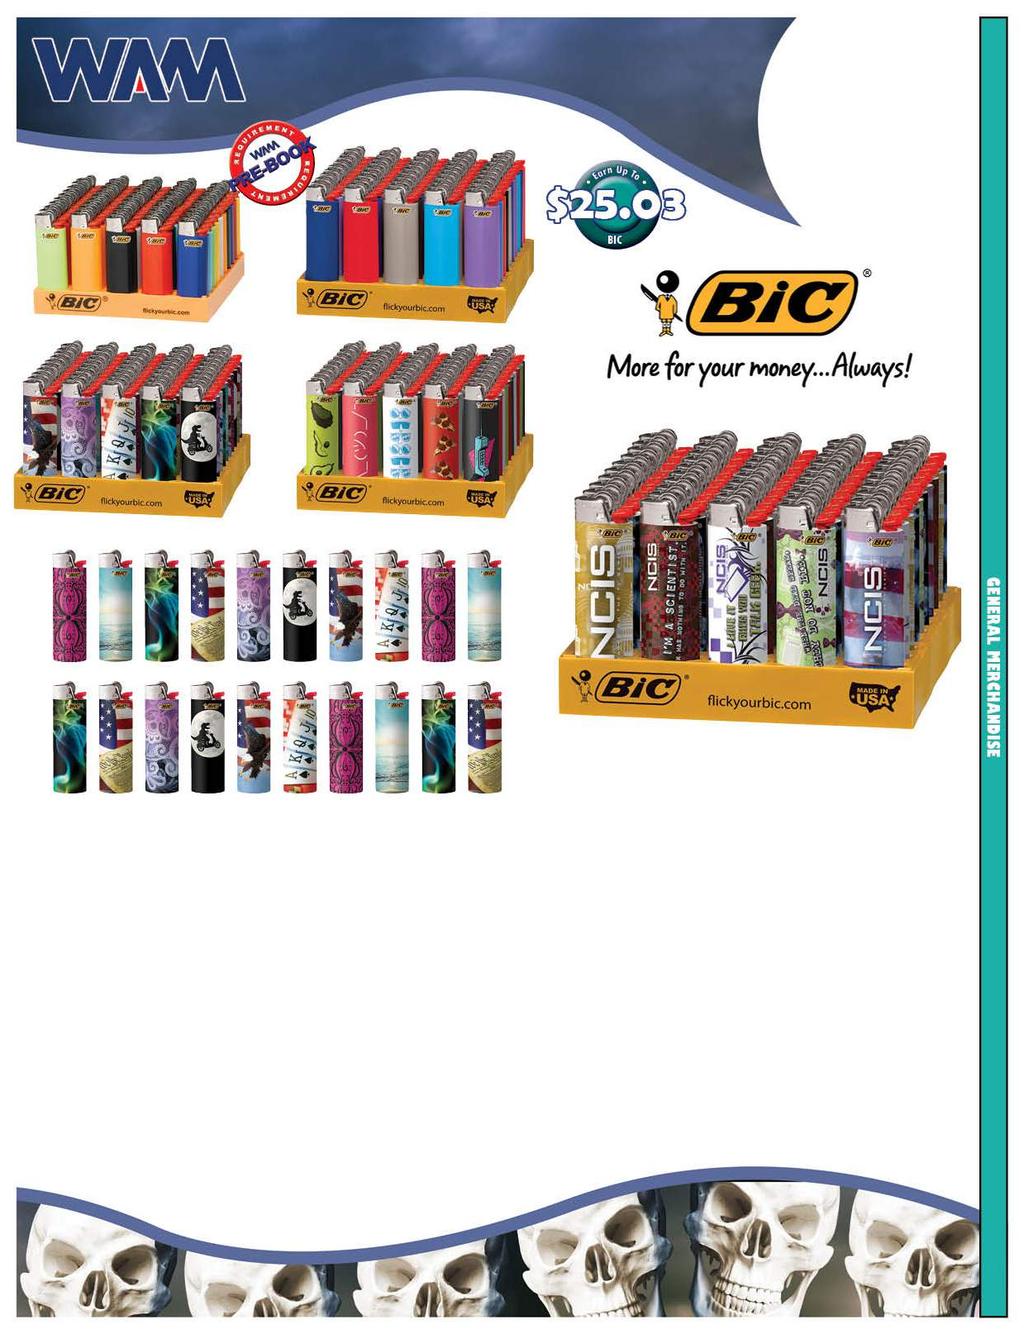 52.7% CT. Description UPC Item # BIC Tray Refill w/free Lighters #LCXTR4A17 Delivery Date: 10/8/17 0-70330- 997-942 $173.39 52.7% 400 50 Mini 00002-5 $1.10 50 Regular 60006-5 $1.